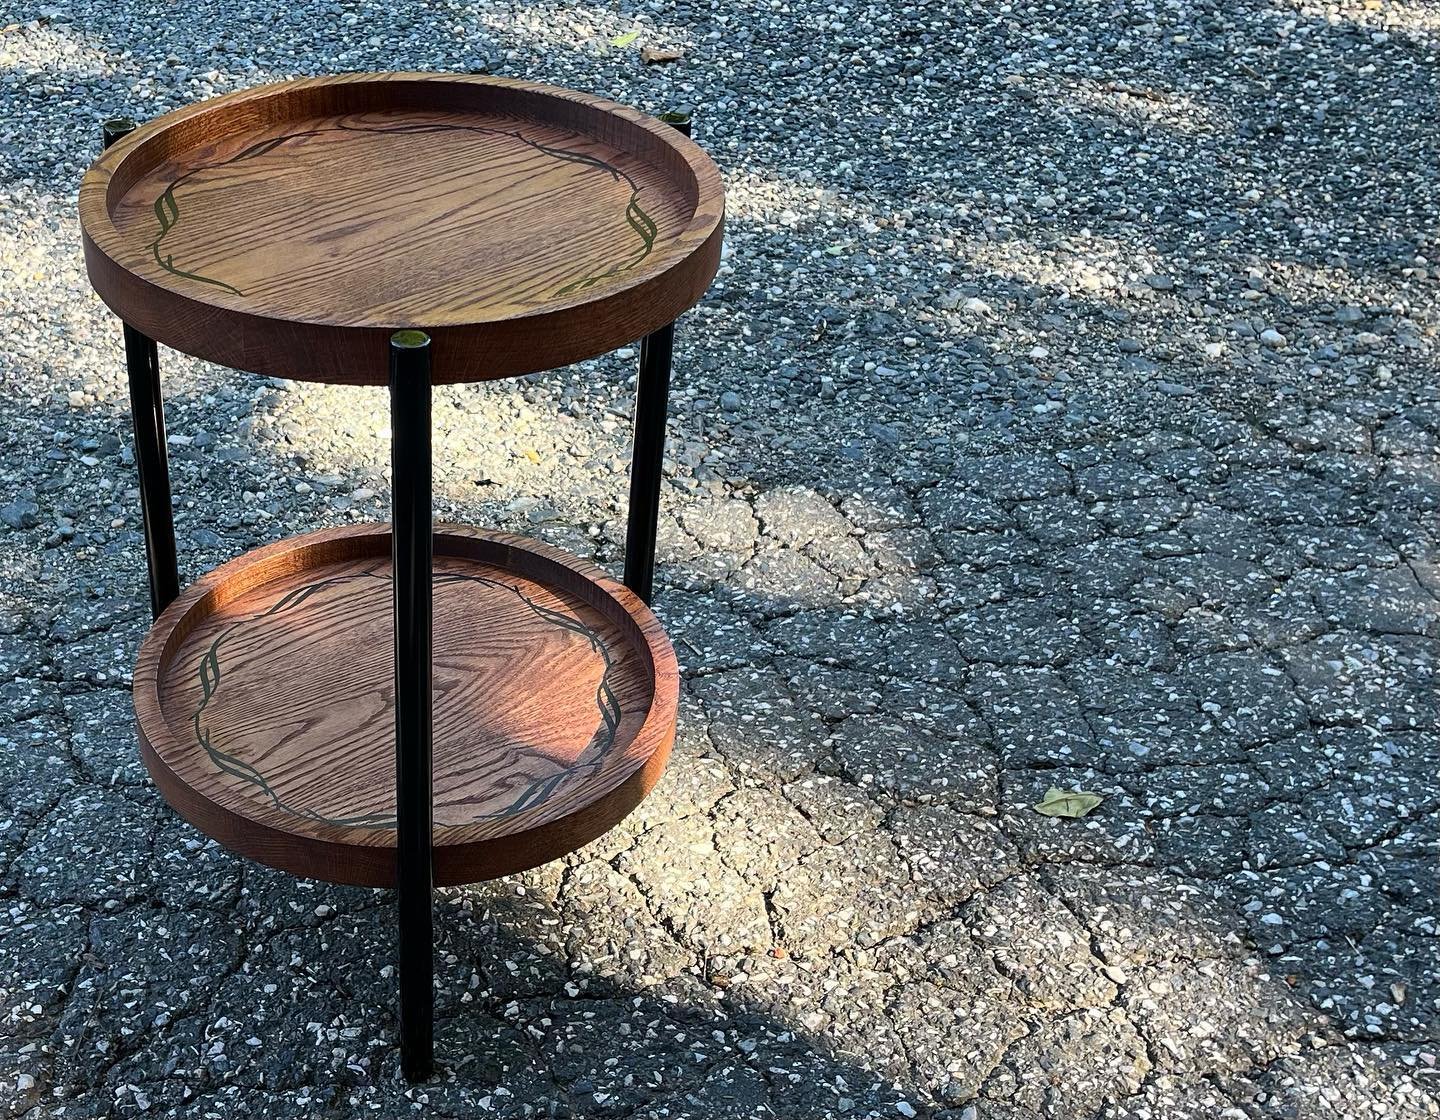 Project #020 for Kathy.

Kathy wanted a custom piece made to serve as an all-purpose small table. It might be used as a plant table, an end table or an accent table for decorations and storage. This piece features a double-tiered design. Each tier is